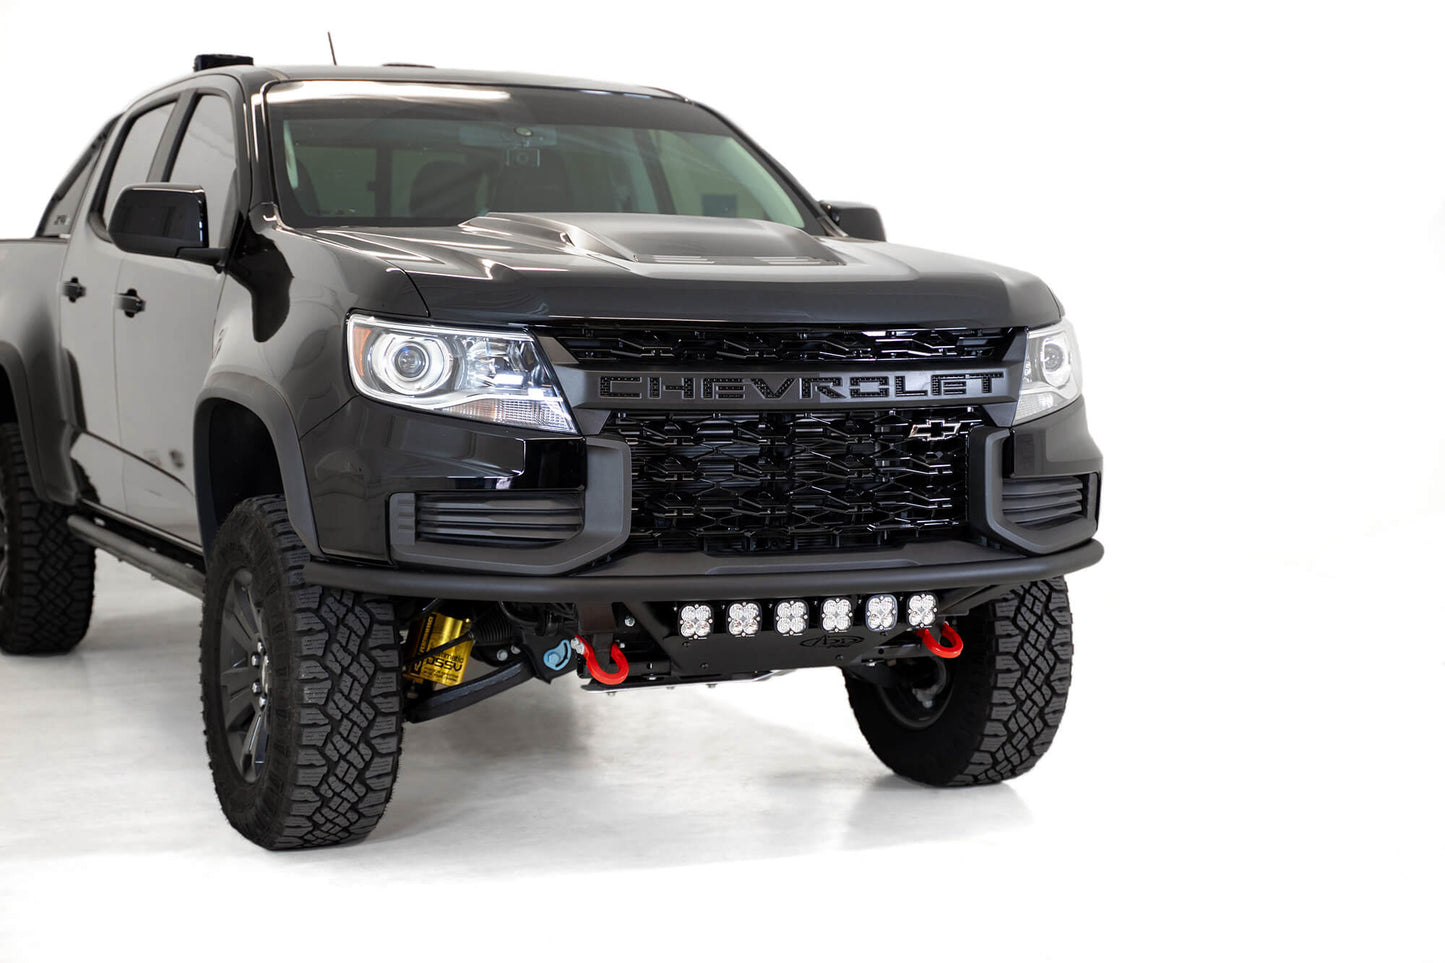 Installed on Car ADD PRO Bolt-on Front Bumper | Heritage | 2021 - 2022 Chevy Colorado ZR2